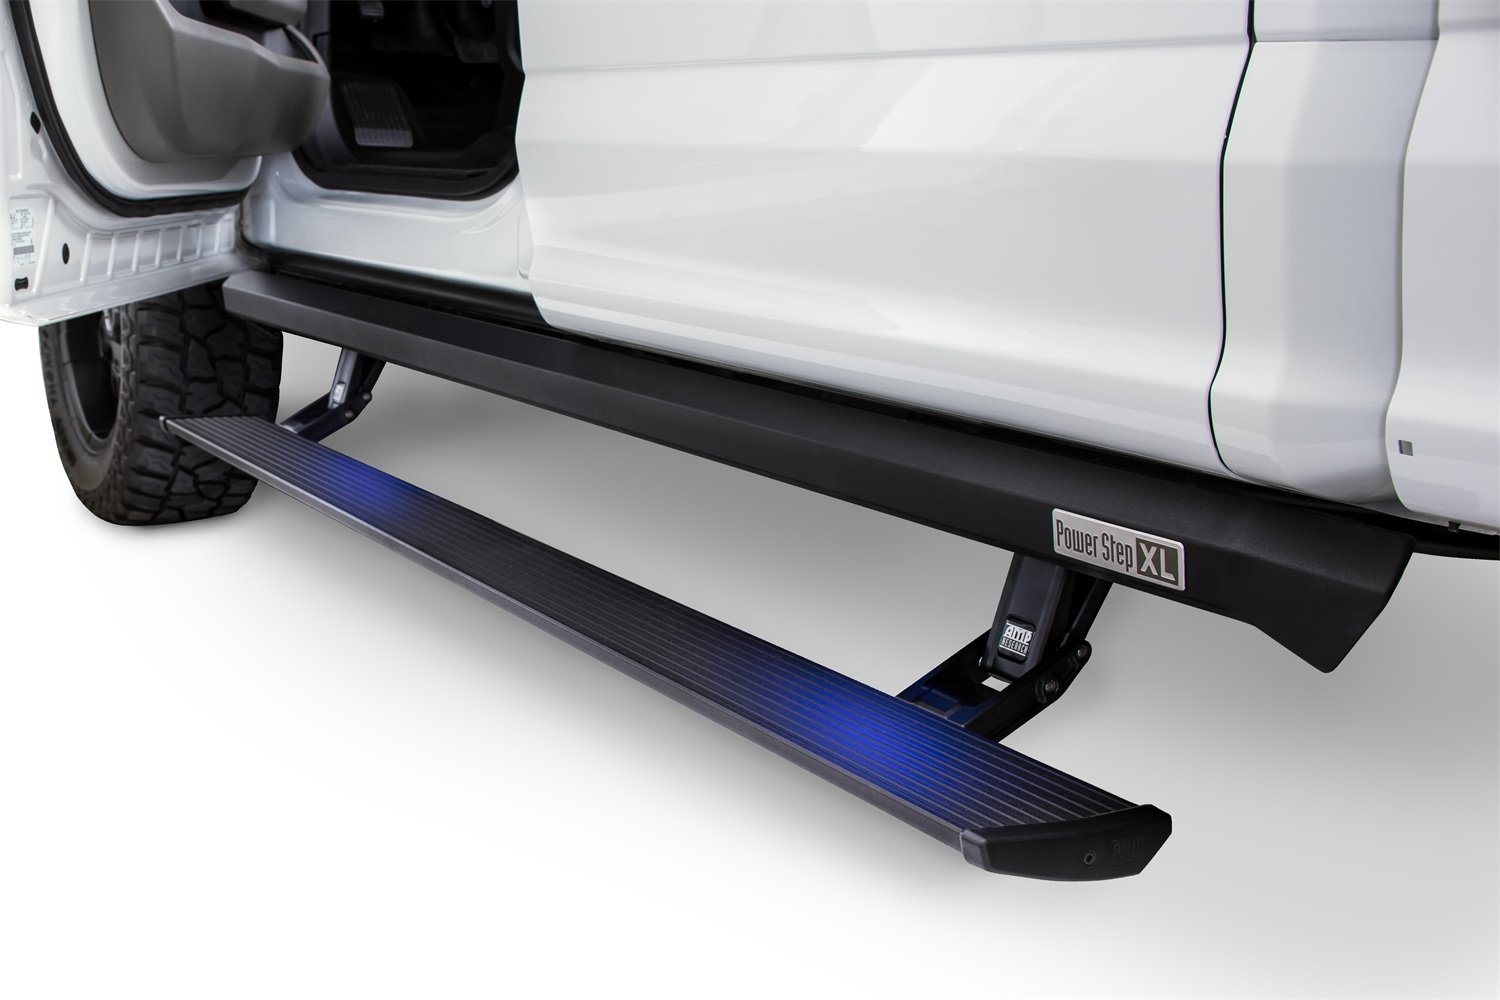 77134-01A PowerStep XL Electric Running Boards, 3 in. Additional Drop, Fits 2008-2016 Ford F-250/350/450 Crew Cab